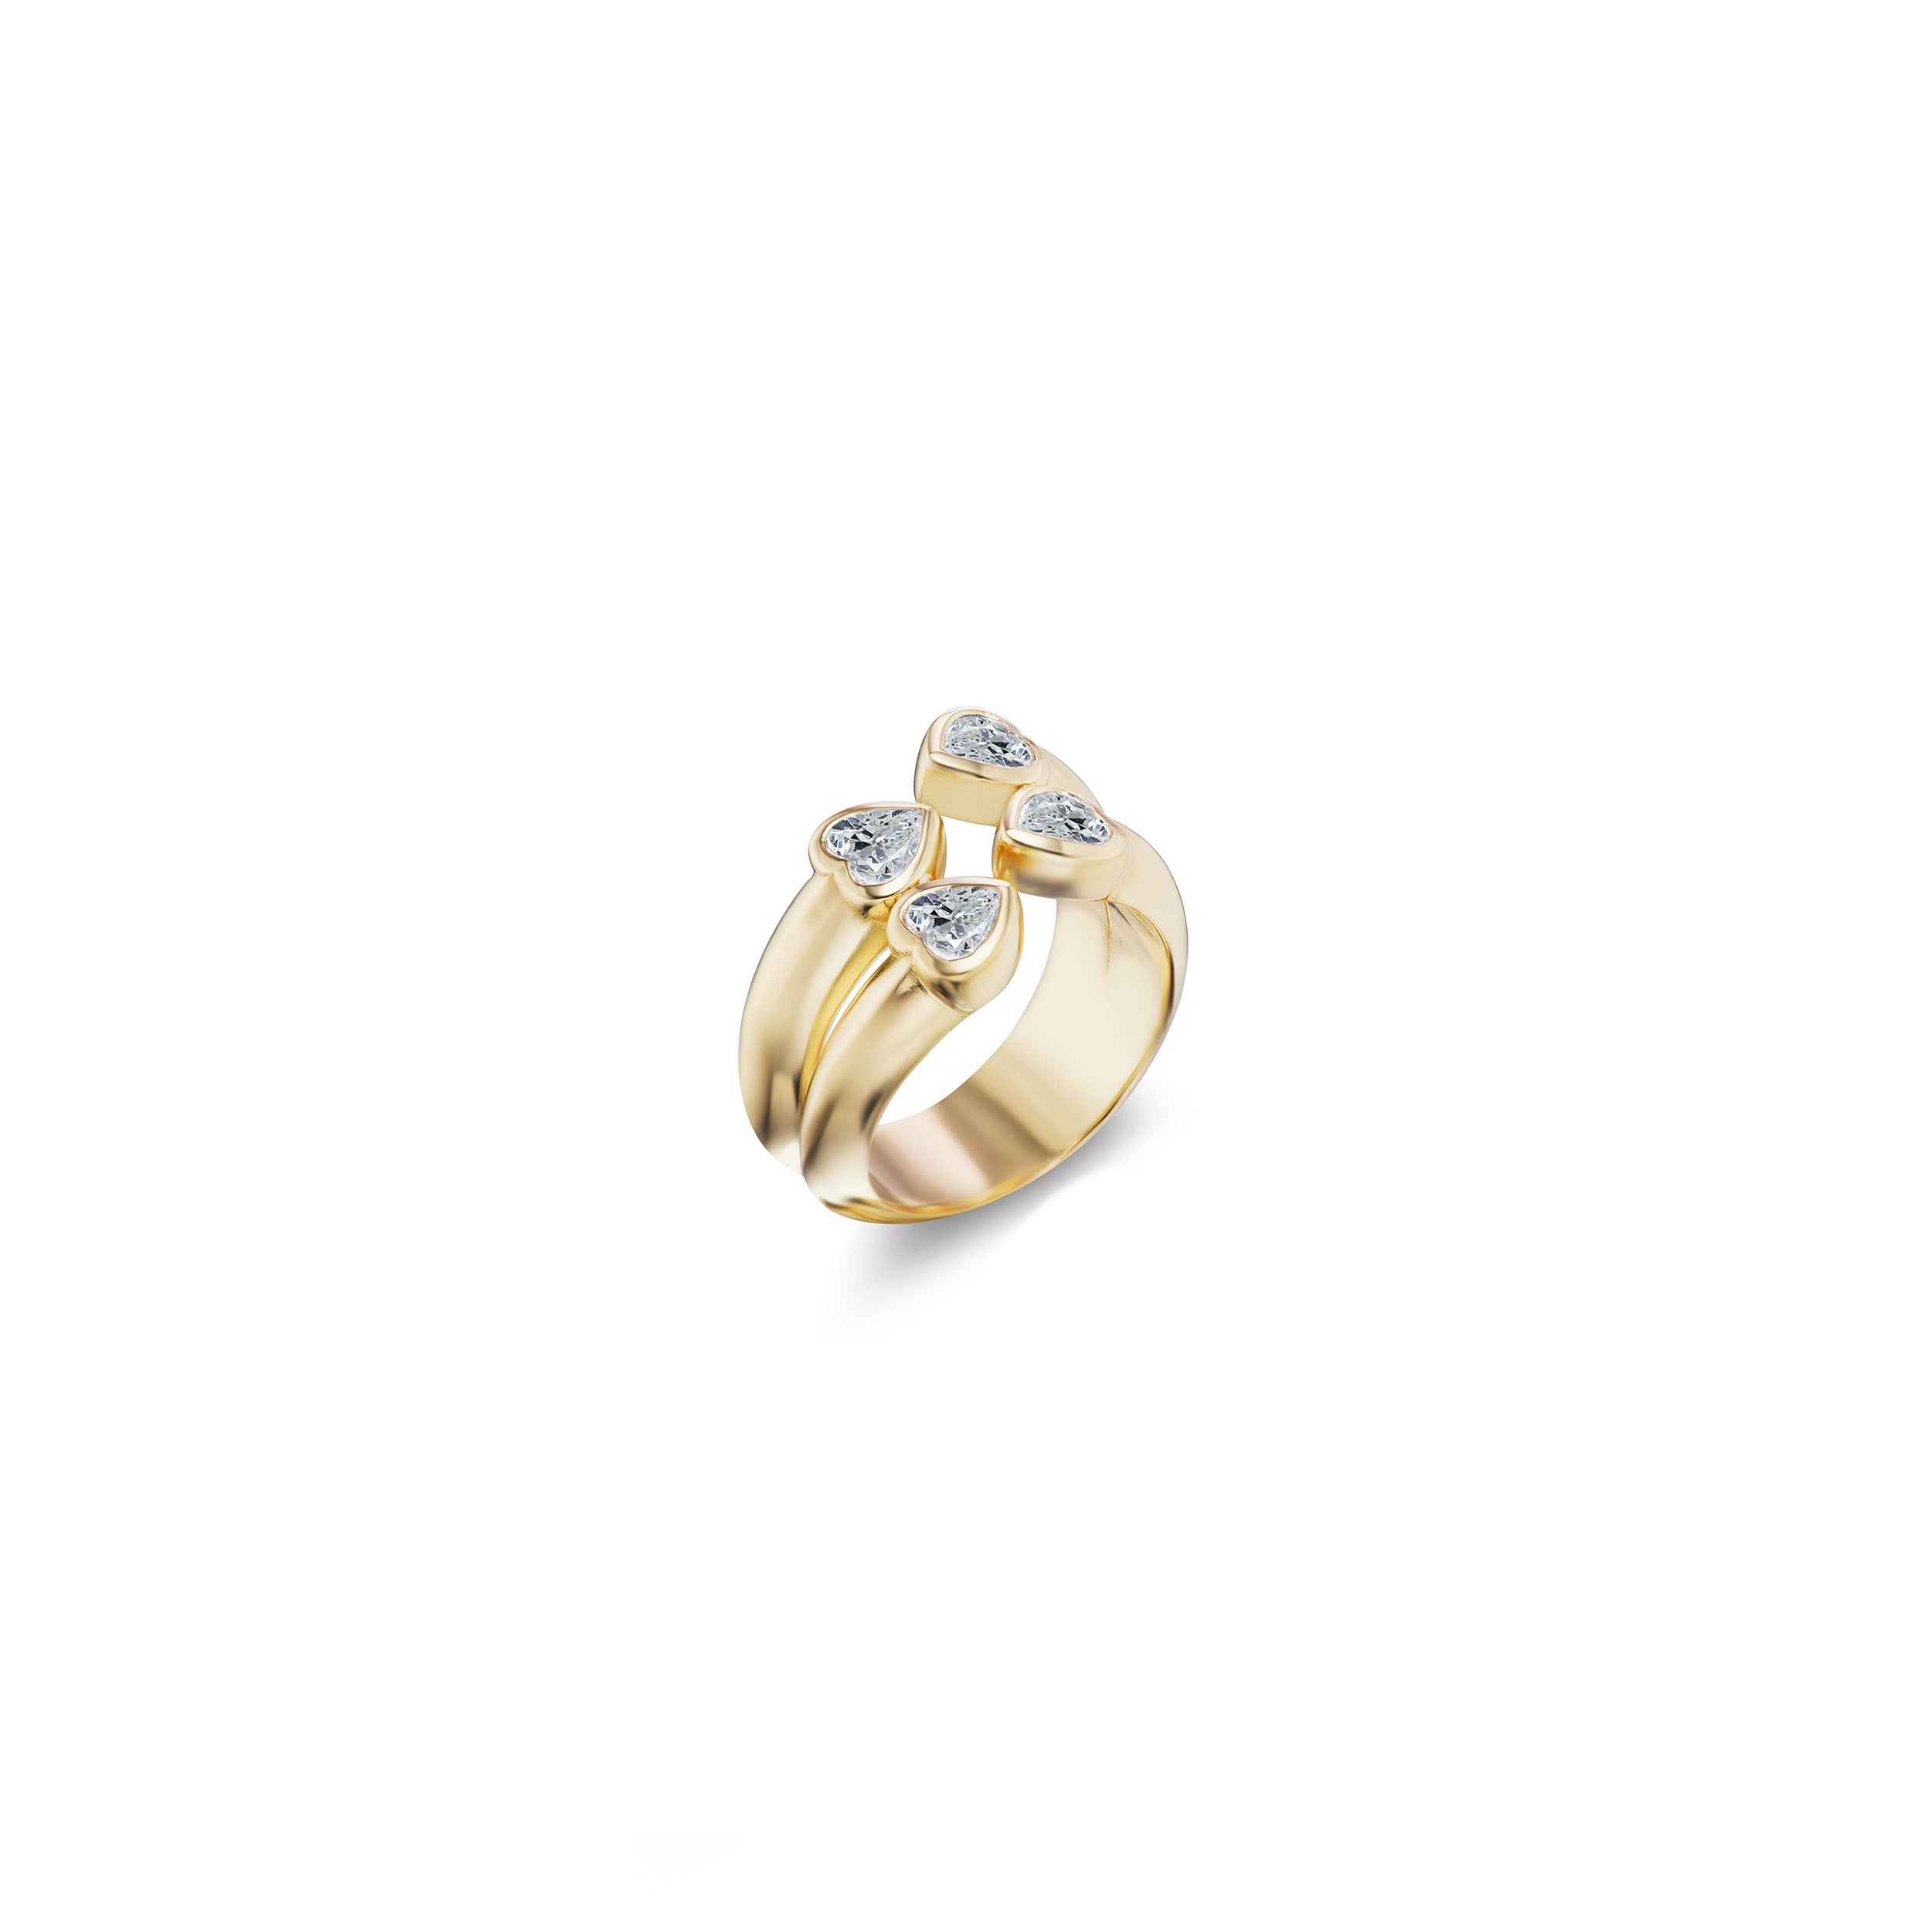 Louis Vuitton 18K Diamond Idylle Blossom Stacking Rings - 18K Yellow Gold  Cocktail Ring, Rings - LOU582695